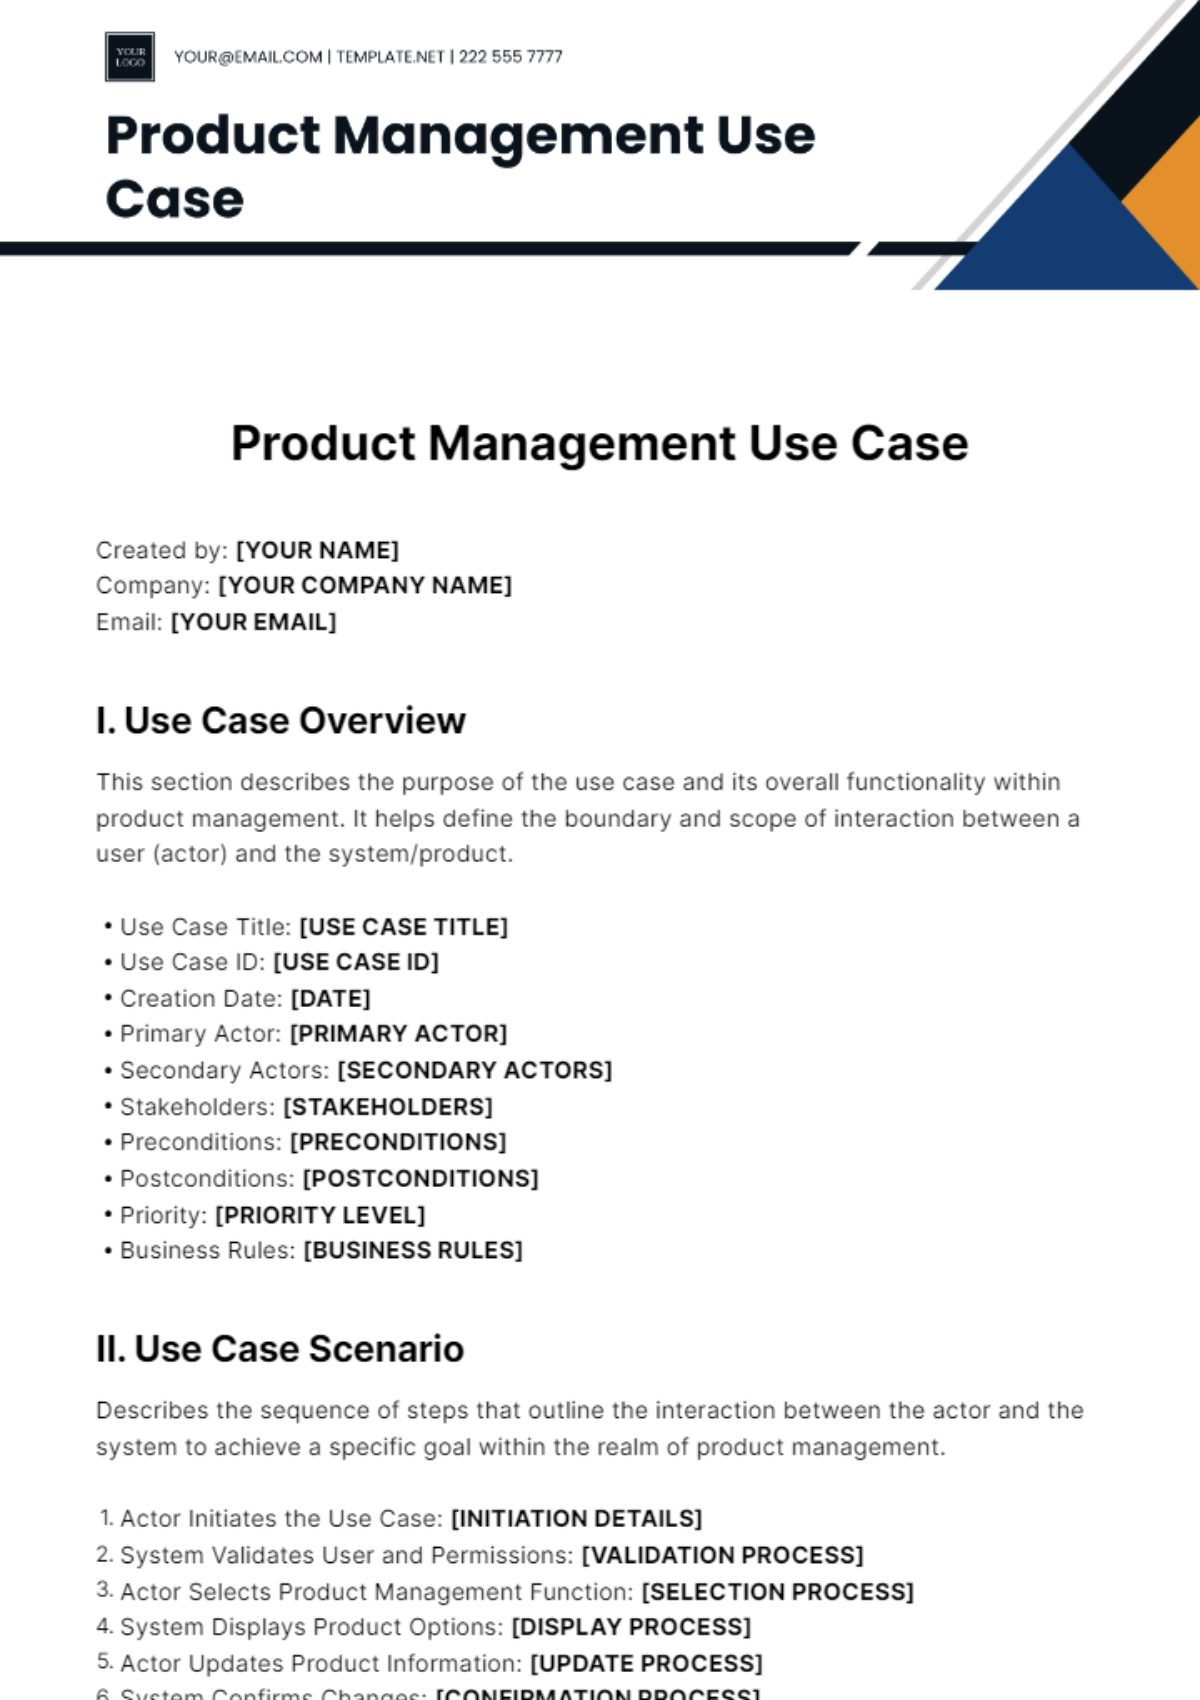 Product Management Use Case Template